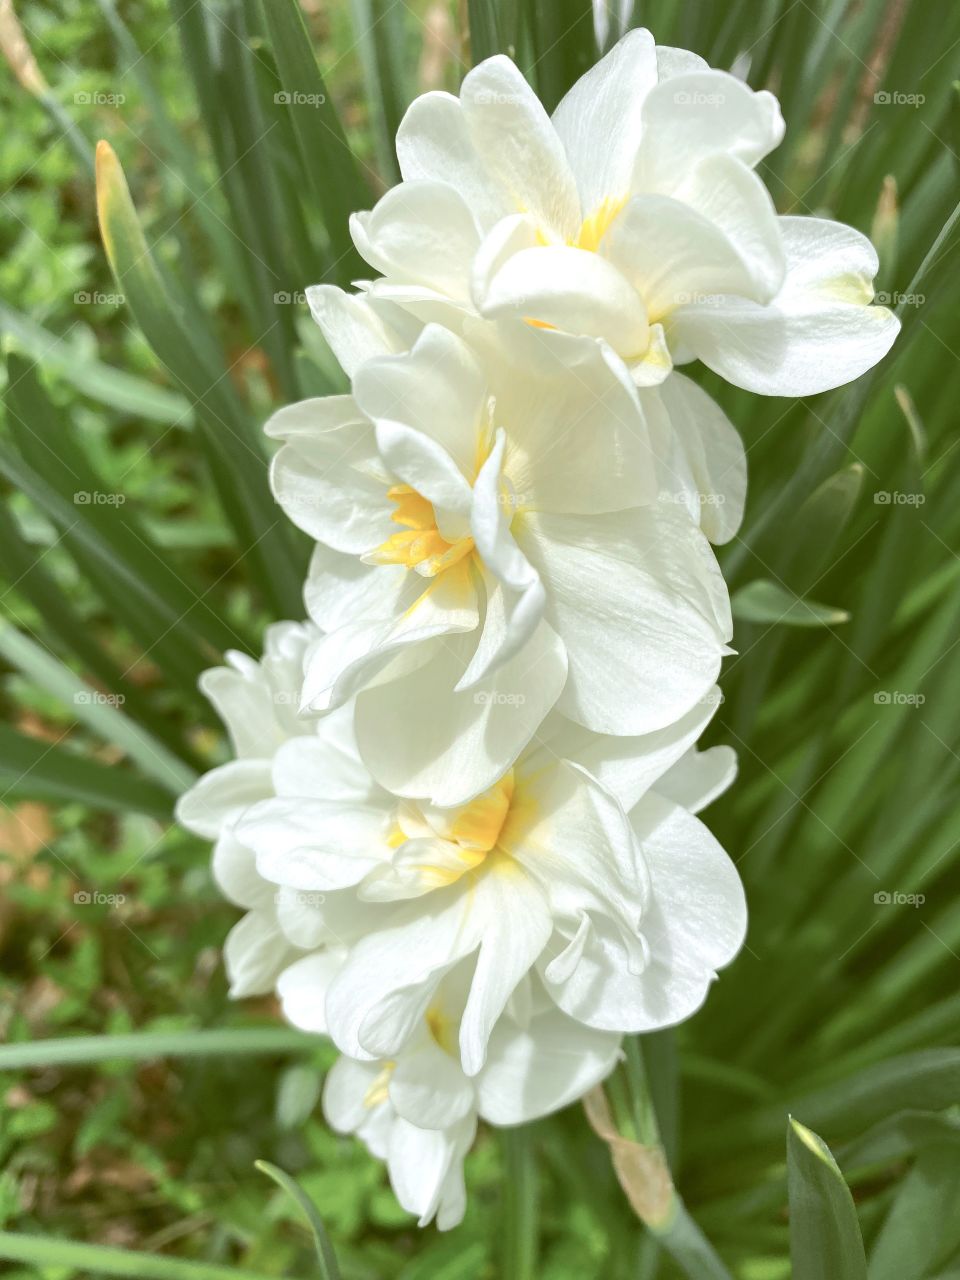 Narcissus flowers 